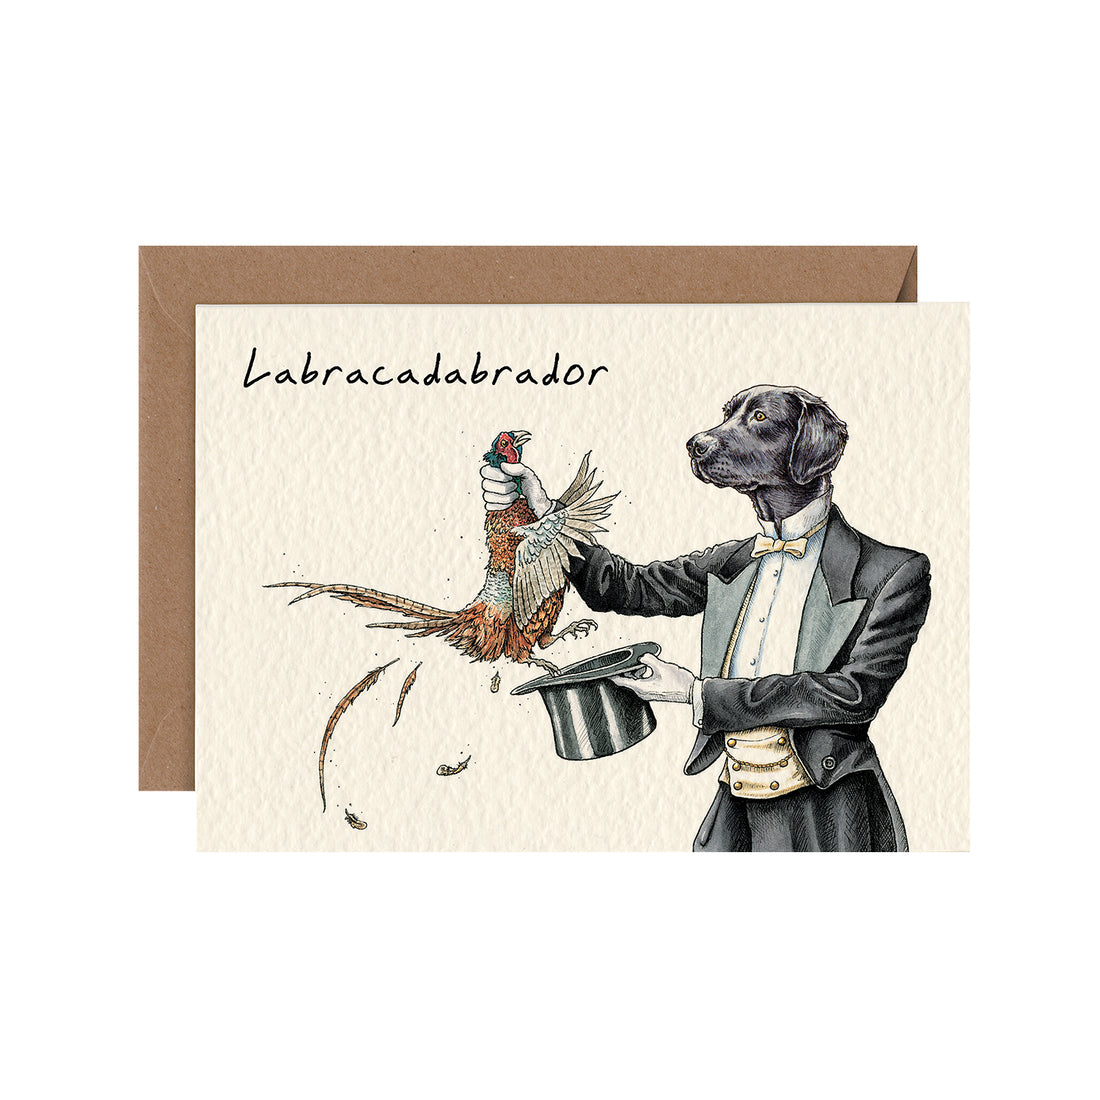 A funny card featuring a tux-clad stage magician with the head of a black labrador retriever pulling a pheasant from his top hat, with the caption &quot;Labracadabrador&quot;. 